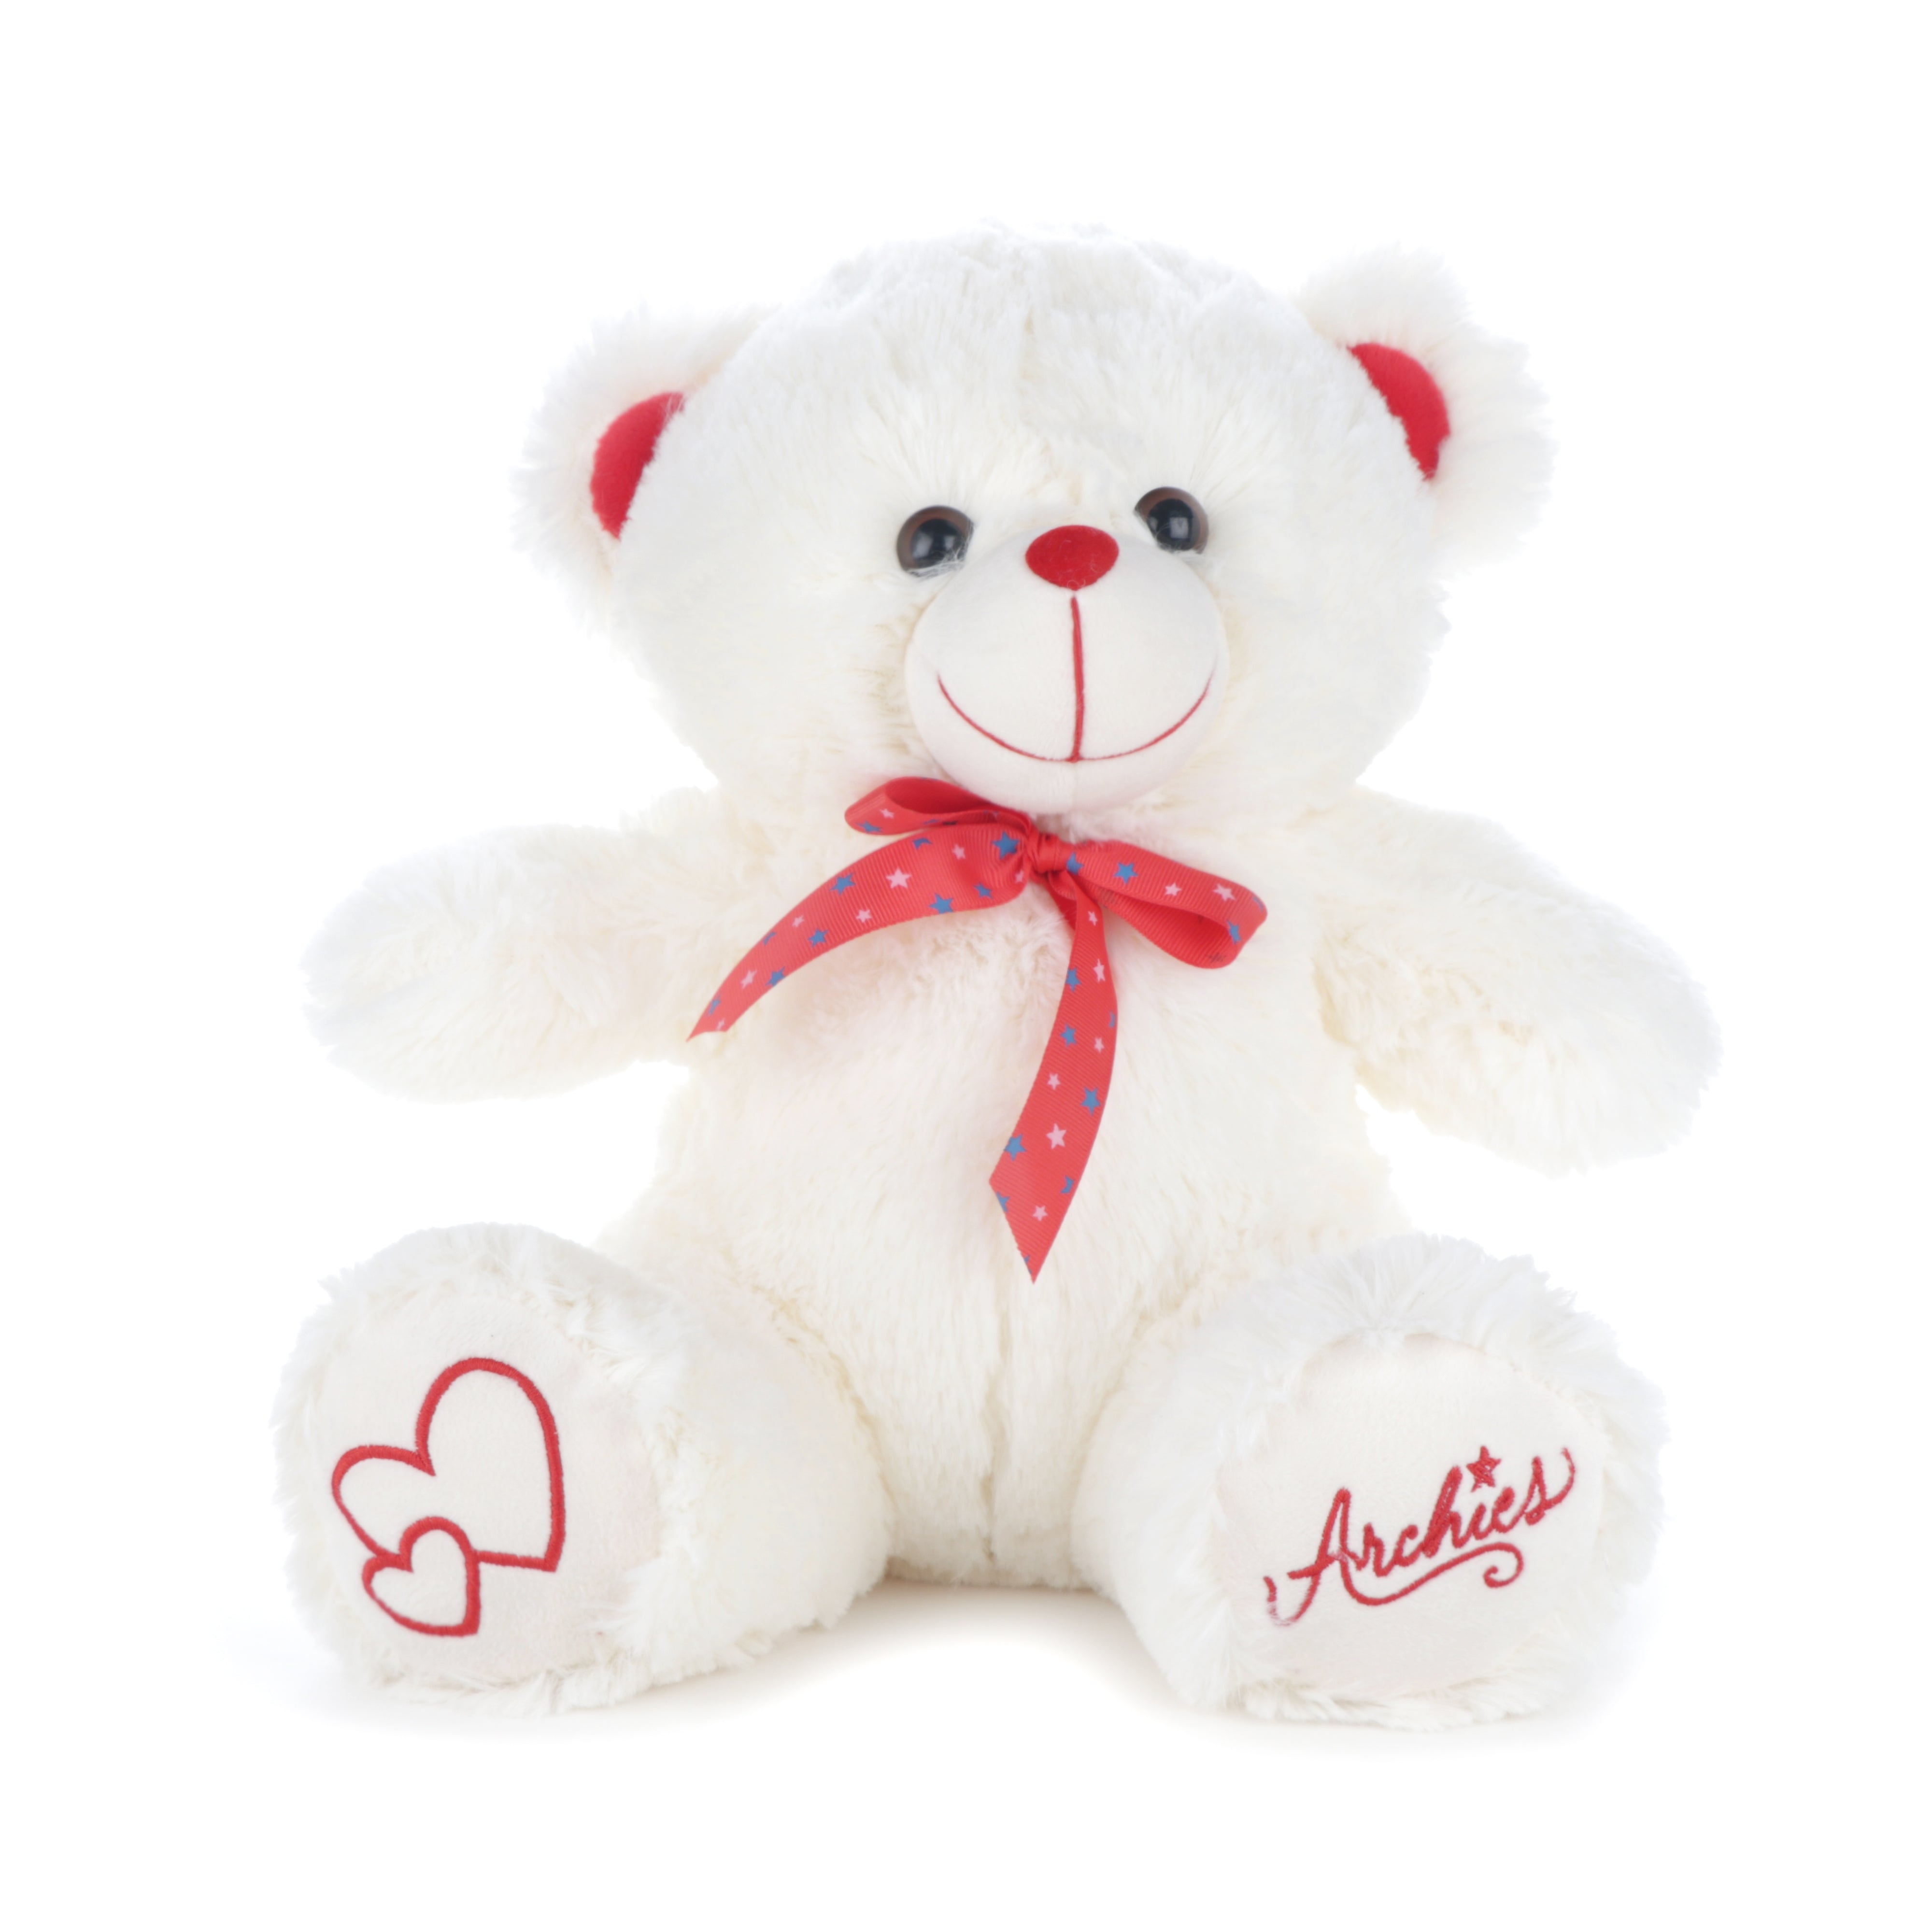 Archies | Archies Soft Toys  Teddy, Soft Toys, Teddy Bear For Girls, Soft Toys For Kids, Birthday Gift For Girls,Wife, Boyfriend, Husband White Bear with Red Bow